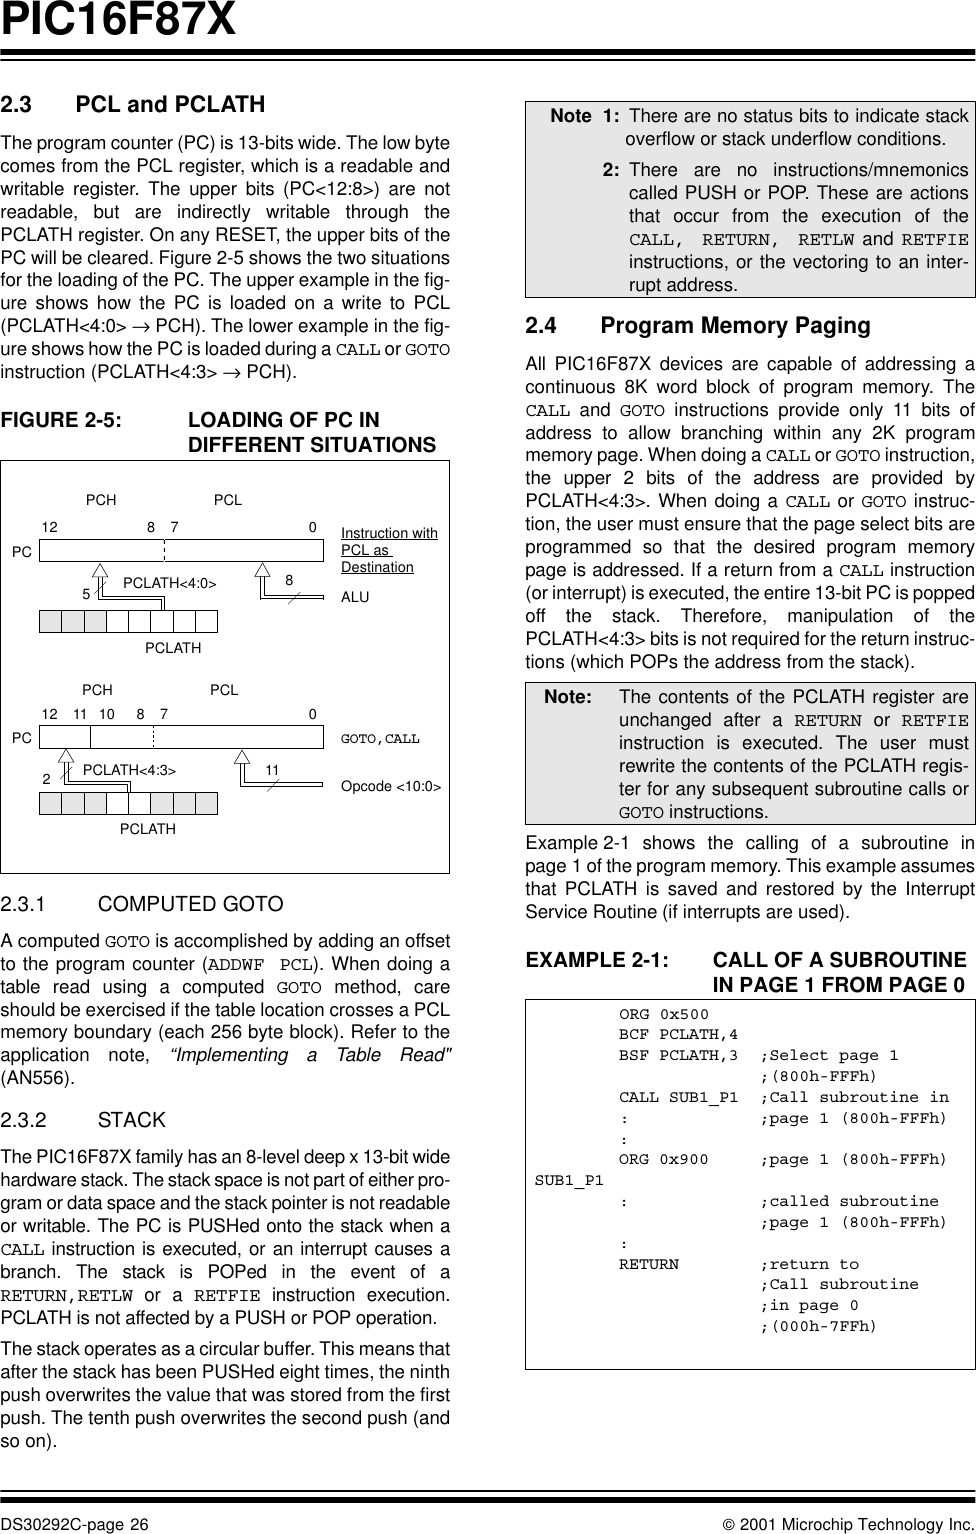 PIC16F87XDS30292C-page 26  2001 Microchip Technology Inc.2.3 PCL and PCLATHThe program counter (PC) is 13-bits wide. The low bytecomes from the PCL register, which is a readable andwritable register. The upper bits (PC&lt;12:8&gt;) are notreadable, but are indirectly writable through thePCLATH register. On any RESET, the upper bits of thePC will be cleared. Figure 2-5 shows the two situationsfor the loading of the PC. The upper example in the fig-ure shows how the PC is loaded on a write to PCL(PCLATH&lt;4:0&gt; → PCH). The lower example in the fig-ure shows how the PC is loaded during a CALL or GOTOinstruction (PCLATH&lt;4:3&gt; → PCH).FIGURE 2-5: LOADING OF PC IN DIFFERENT SITUATIONS2.3.1 COMPUTED GOTOA computed GOTO is accomplished by adding an offsetto the program counter (ADDWF PCL). When doing atable read using a computed GOTO method, careshould be exercised if the table location crosses a PCLmemory boundary (each 256 byte block). Refer to theapplication note, “Implementing a Table Read&quot;(AN556).2.3.2 STACKThe PIC16F87X family has an 8-level deep x 13-bit widehardware stack. The stack space is not part of either pro-gram or data space and the stack pointer is not readableor writable. The PC is PUSHed onto the stack when aCALL instruction is executed, or an interrupt causes abranch. The stack is POPed in the event of aRETURN,RETLW or a RETFIE instruction execution.PCLATH is not affected by a PUSH or POP operation.The stack operates as a circular buffer. This means thatafter the stack has been PUSHed eight times, the ninthpush overwrites the value that was stored from the firstpush. The tenth push overwrites the second push (andso on). 2.4 Program Memory PagingAll PIC16F87X devices are capable of addressing acontinuous 8K word block of program memory. TheCALL and GOTO instructions provide only 11 bits ofaddress to allow branching within any 2K programmemory page. When doing a CALL or GOTO instruction,the upper 2 bits of the address are provided byPCLATH&lt;4:3&gt;. When doing a CALL or GOTO instruc-tion, the user must ensure that the page select bits areprogrammed so that the desired program memorypage is addressed. If a return from a CALL instruction(or interrupt) is executed, the entire 13-bit PC is poppedoff the stack. Therefore, manipulation of thePCLATH&lt;4:3&gt; bits is not required for the return instruc-tions (which POPs the address from the stack).Example 2-1 shows the calling of a subroutine inpage 1 of the program memory. This example assumesthat PCLATH is saved and restored by the InterruptService Routine (if interrupts are used).EXAMPLE 2-1: CALL OF A SUBROUTINE IN PAGE 1 FROM PAGE 0PC12 8 7 05PCLATH&lt;4:0&gt;PCLATHInstruction withALUGOTO,CALLOpcode &lt;10:0&gt;8PC12 11 10 011PCLATH&lt;4:3&gt;PCH PCL872PCLATHPCH PCLPCL as DestinationNote 1: There are no status bits to indicate stackoverflow or stack underflow conditions.2: There are no instructions/mnemonicscalled PUSH or POP. These are actionsthat occur from the execution of theCALL, RETURN, RETLW and RETFIEinstructions, or the vectoring to an inter-rupt address.Note: The contents of the PCLATH register areunchanged after a RETURN or RETFIEinstruction is executed. The user mustrewrite the contents of the PCLATH regis-ter for any subsequent subroutine calls orGOTO instructions.ORG 0x500BCF PCLATH,4BSF PCLATH,3 ;Select page 1;(800h-FFFh)CALL SUB1_P1 ;Call subroutine in: ;page 1 (800h-FFFh):ORG 0x900 ;page 1 (800h-FFFh)SUB1_P1: ;called subroutine;page 1 (800h-FFFh):RETURN ;return to ;Call subroutine  ;in page 0;(000h-7FFh)